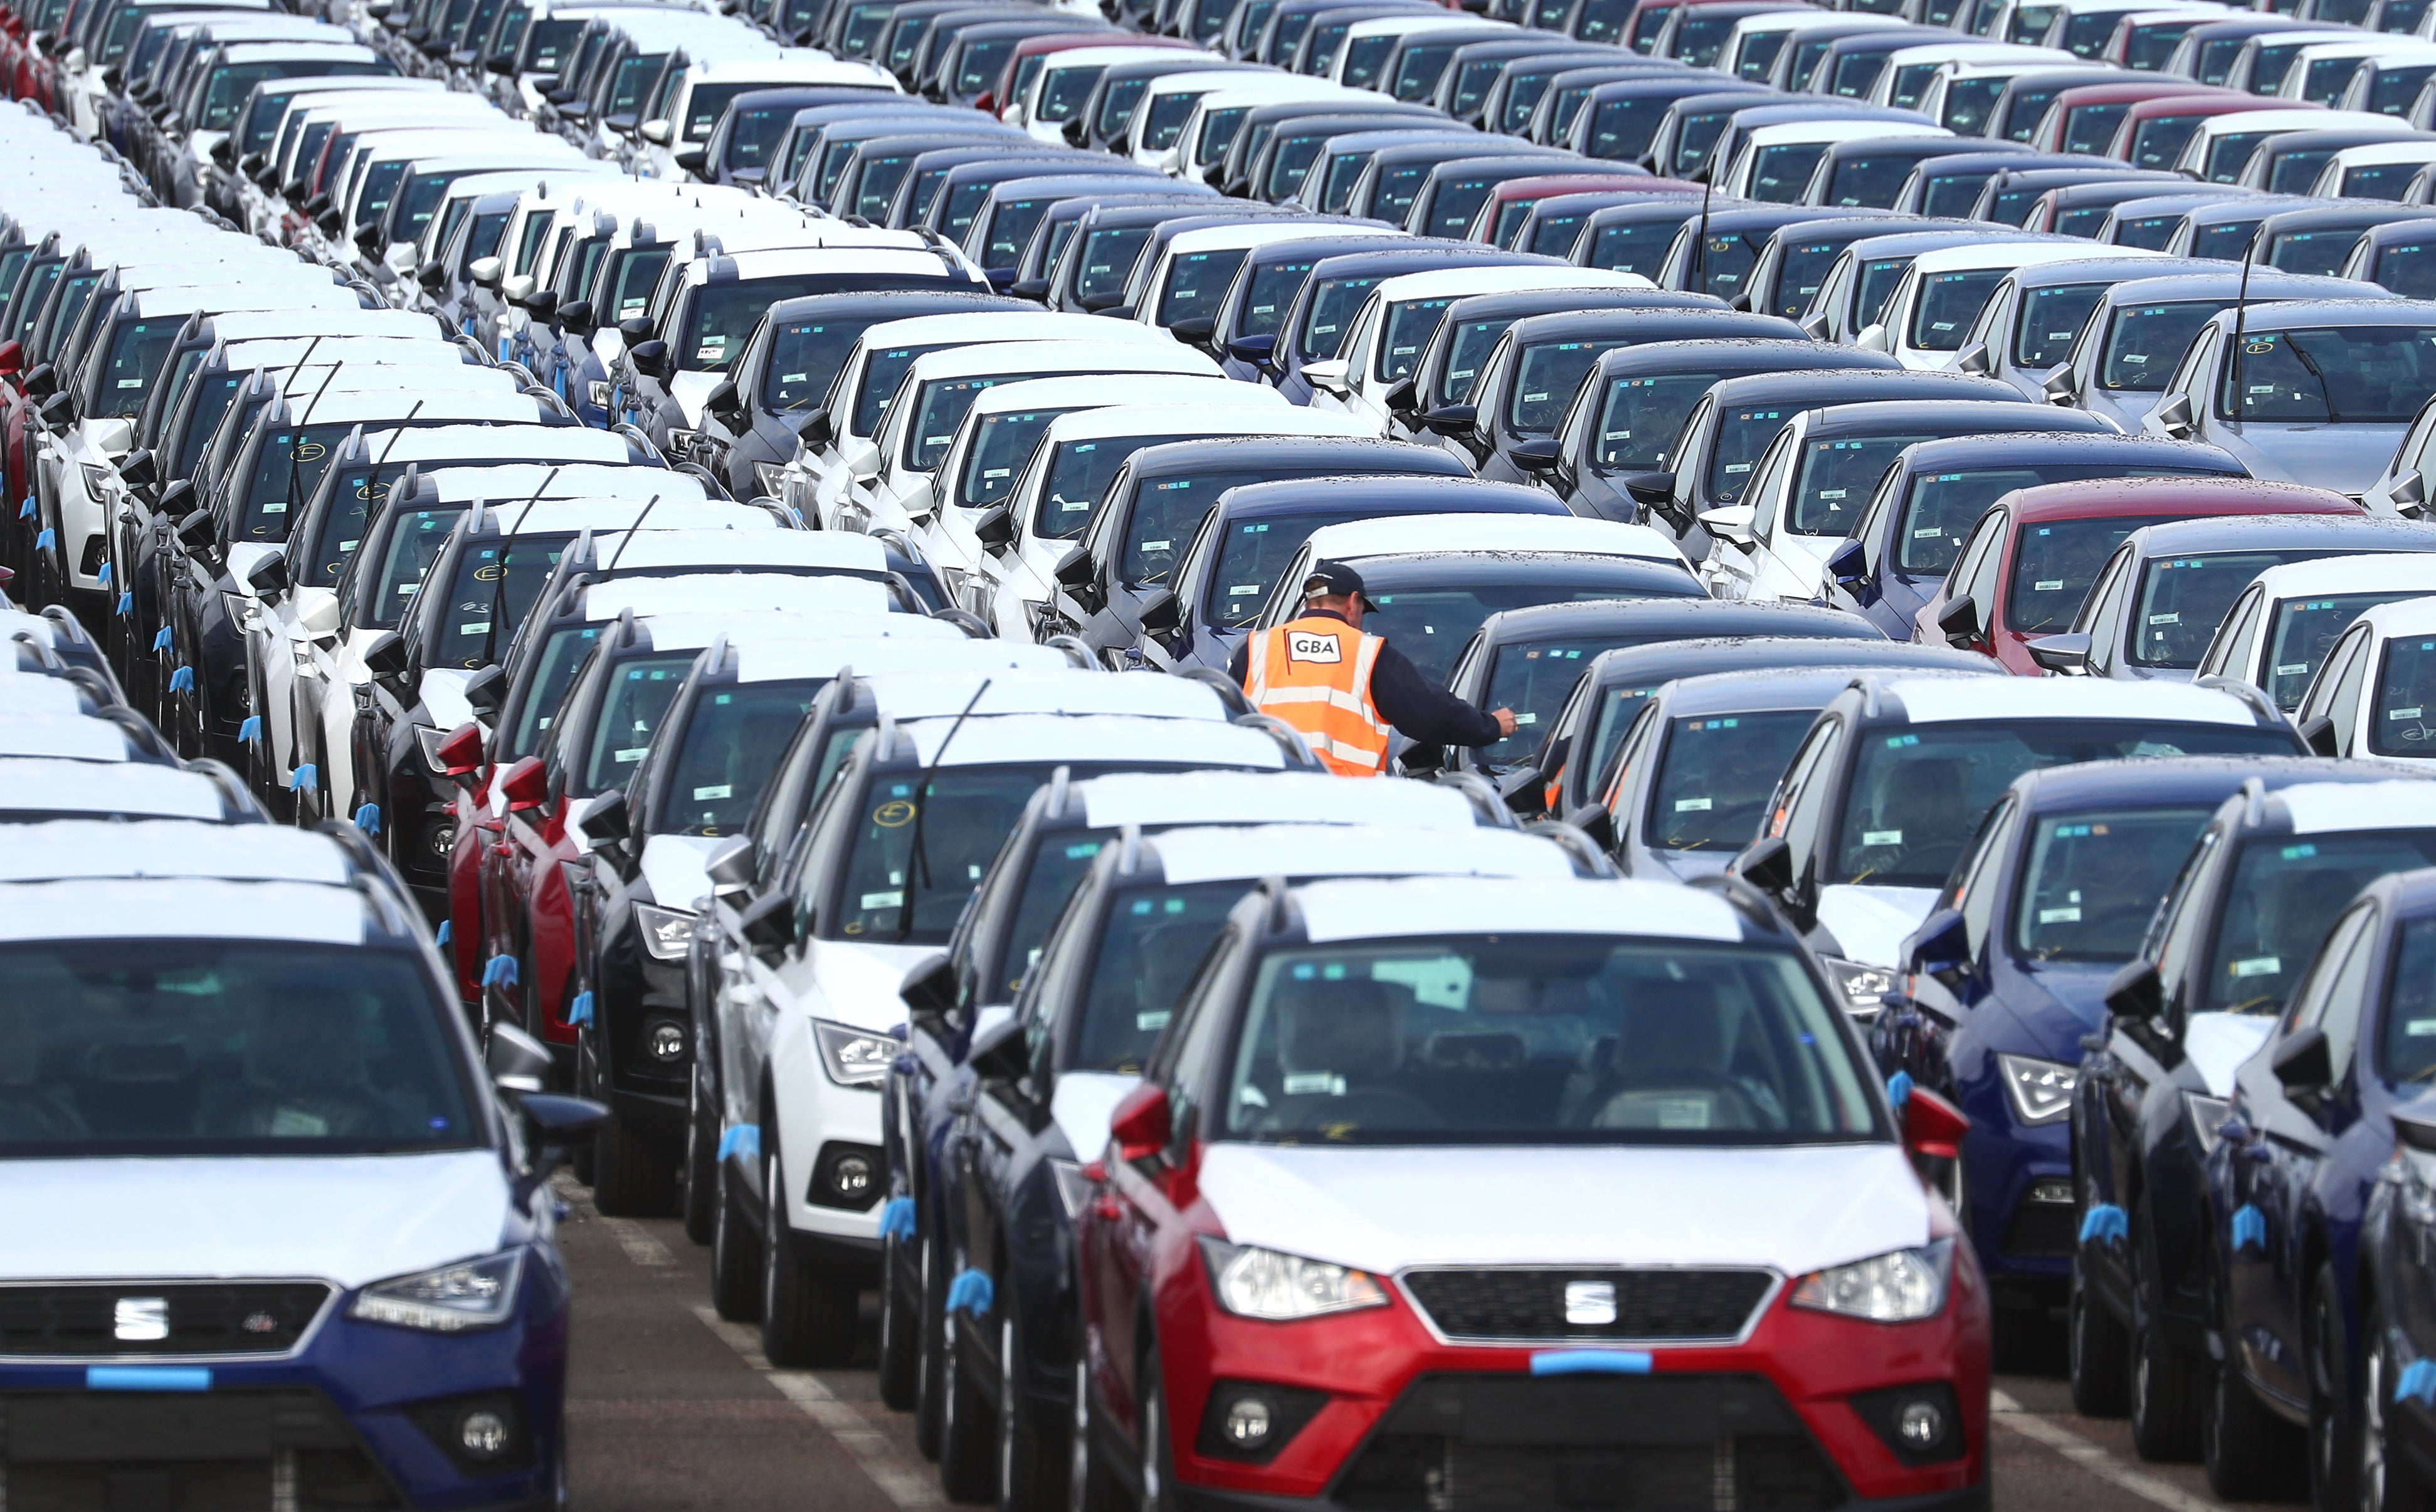 The price of some vehicle parts has soared in recent years